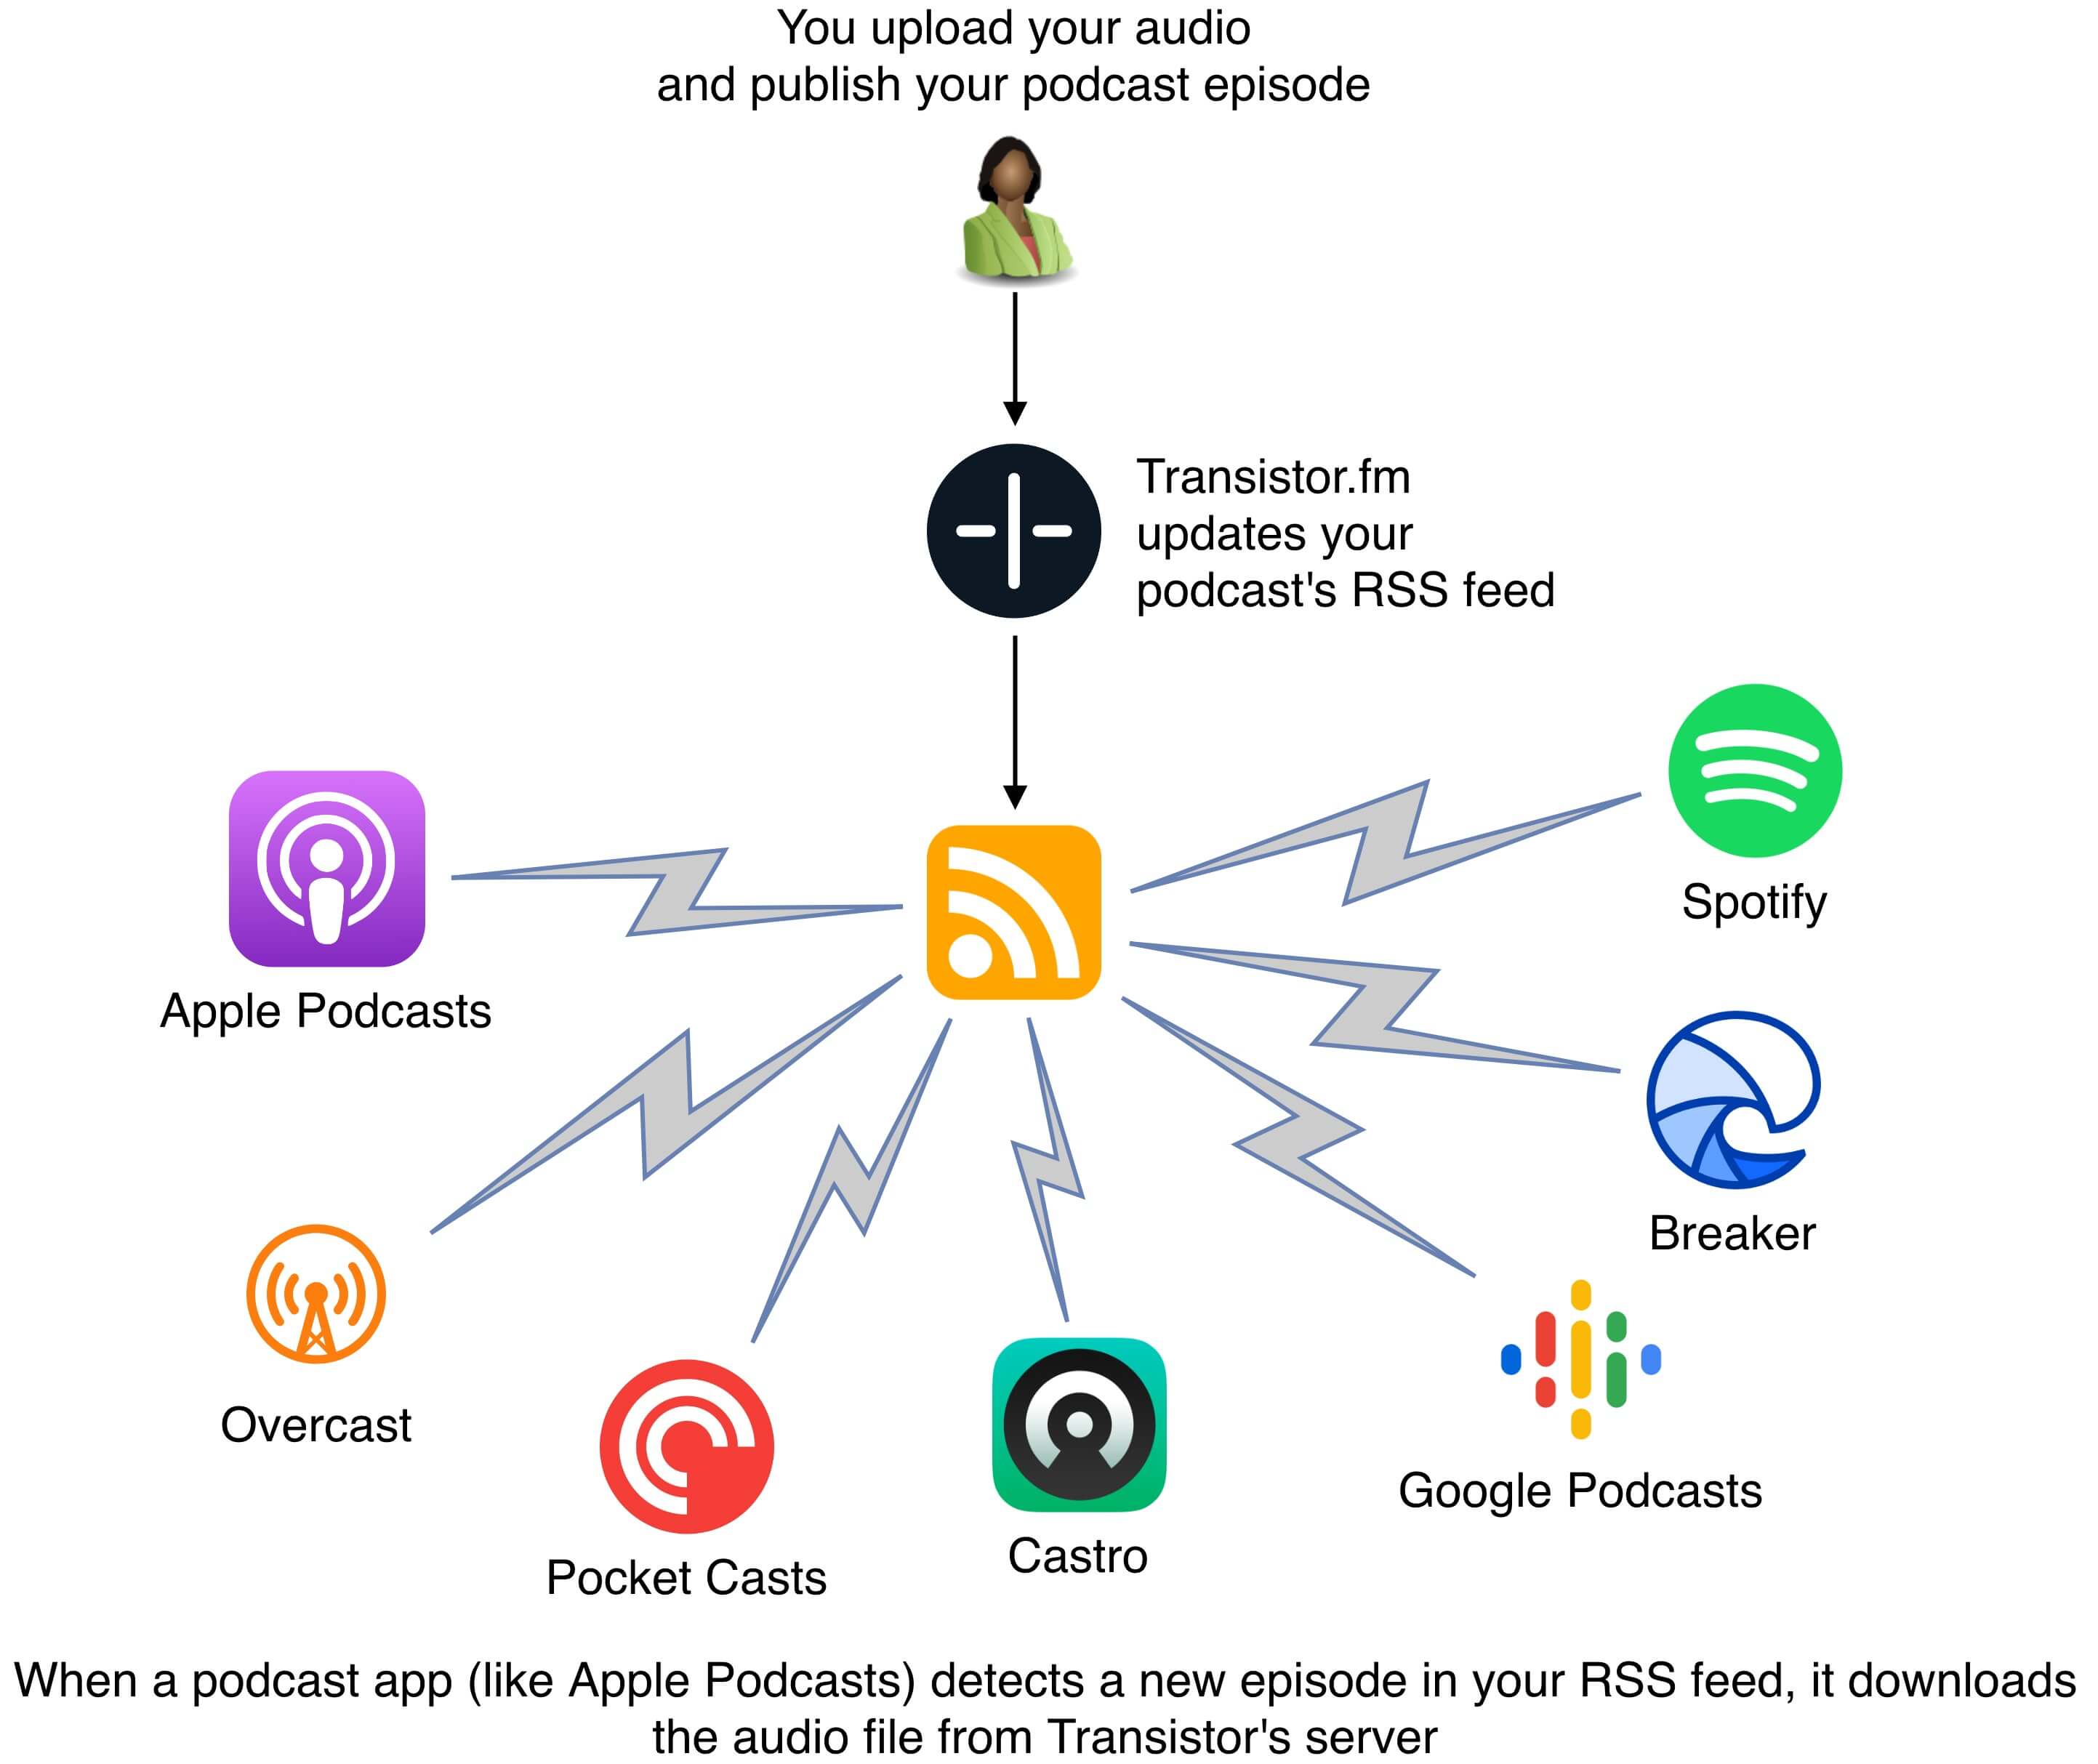 How to publish a podcast on Spotify and Apple Podcasts